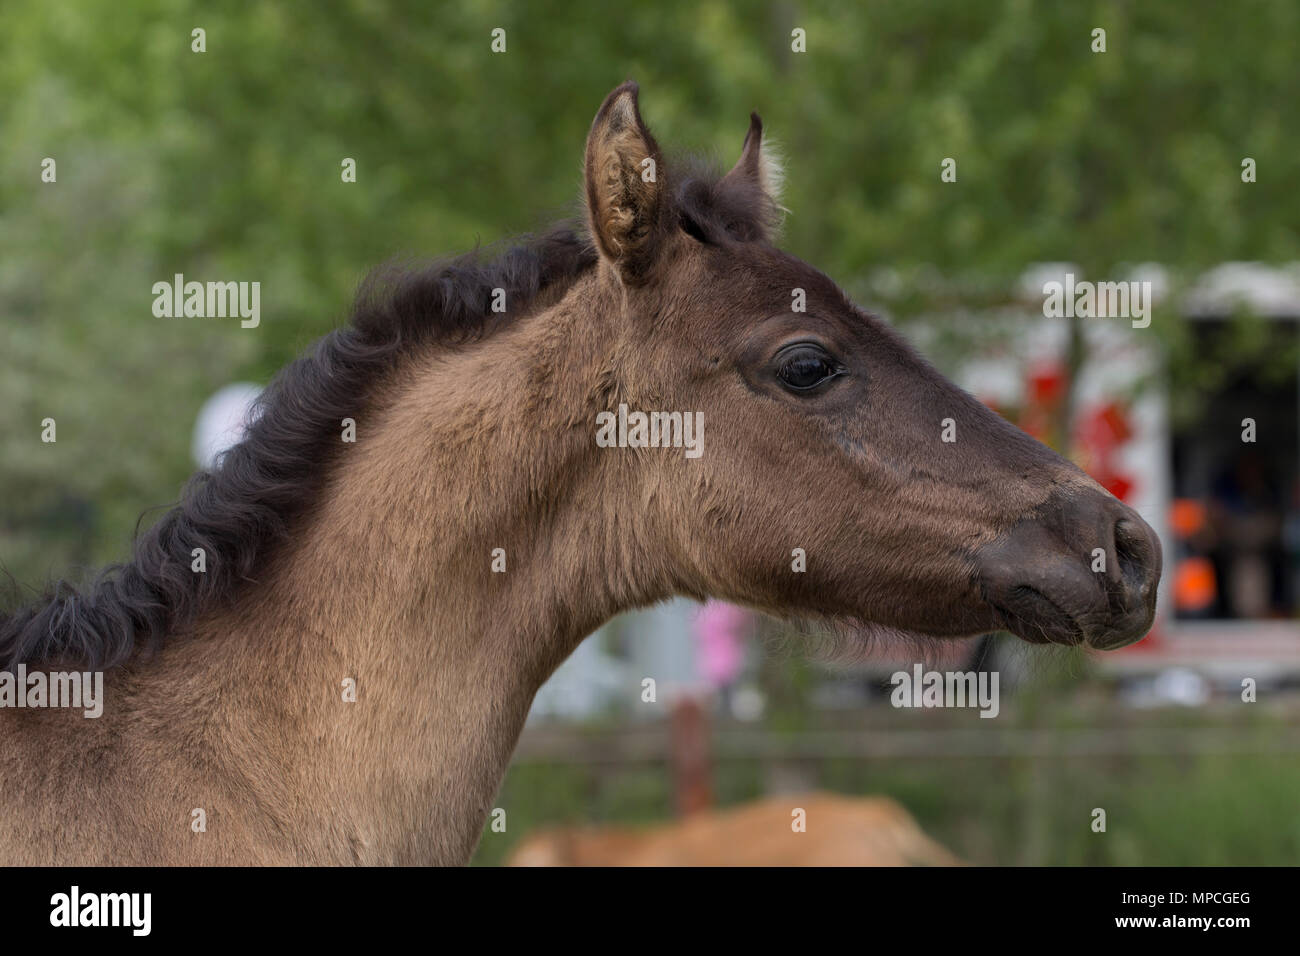 Bay or chestnut foal Stock Photo